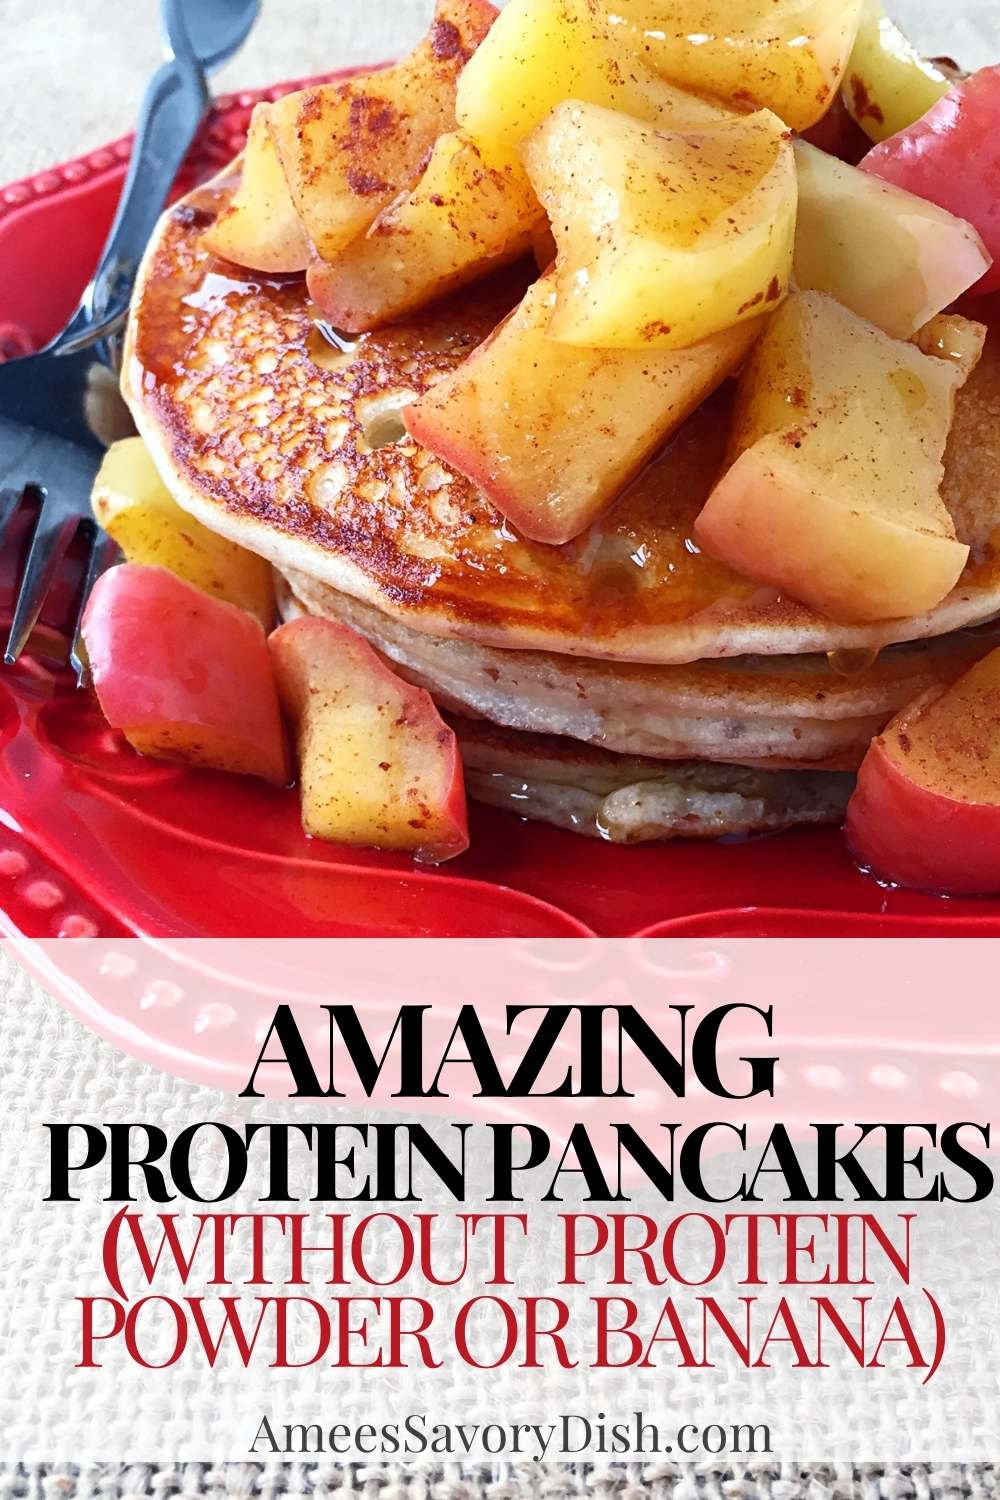 These AMAZING Protein Pancakes without Protein Powder (or banana) are made with gluten-free baking mix, Greek yogurt, and eggs totaling 20 grams of protein per serving! via @Ameessavorydish